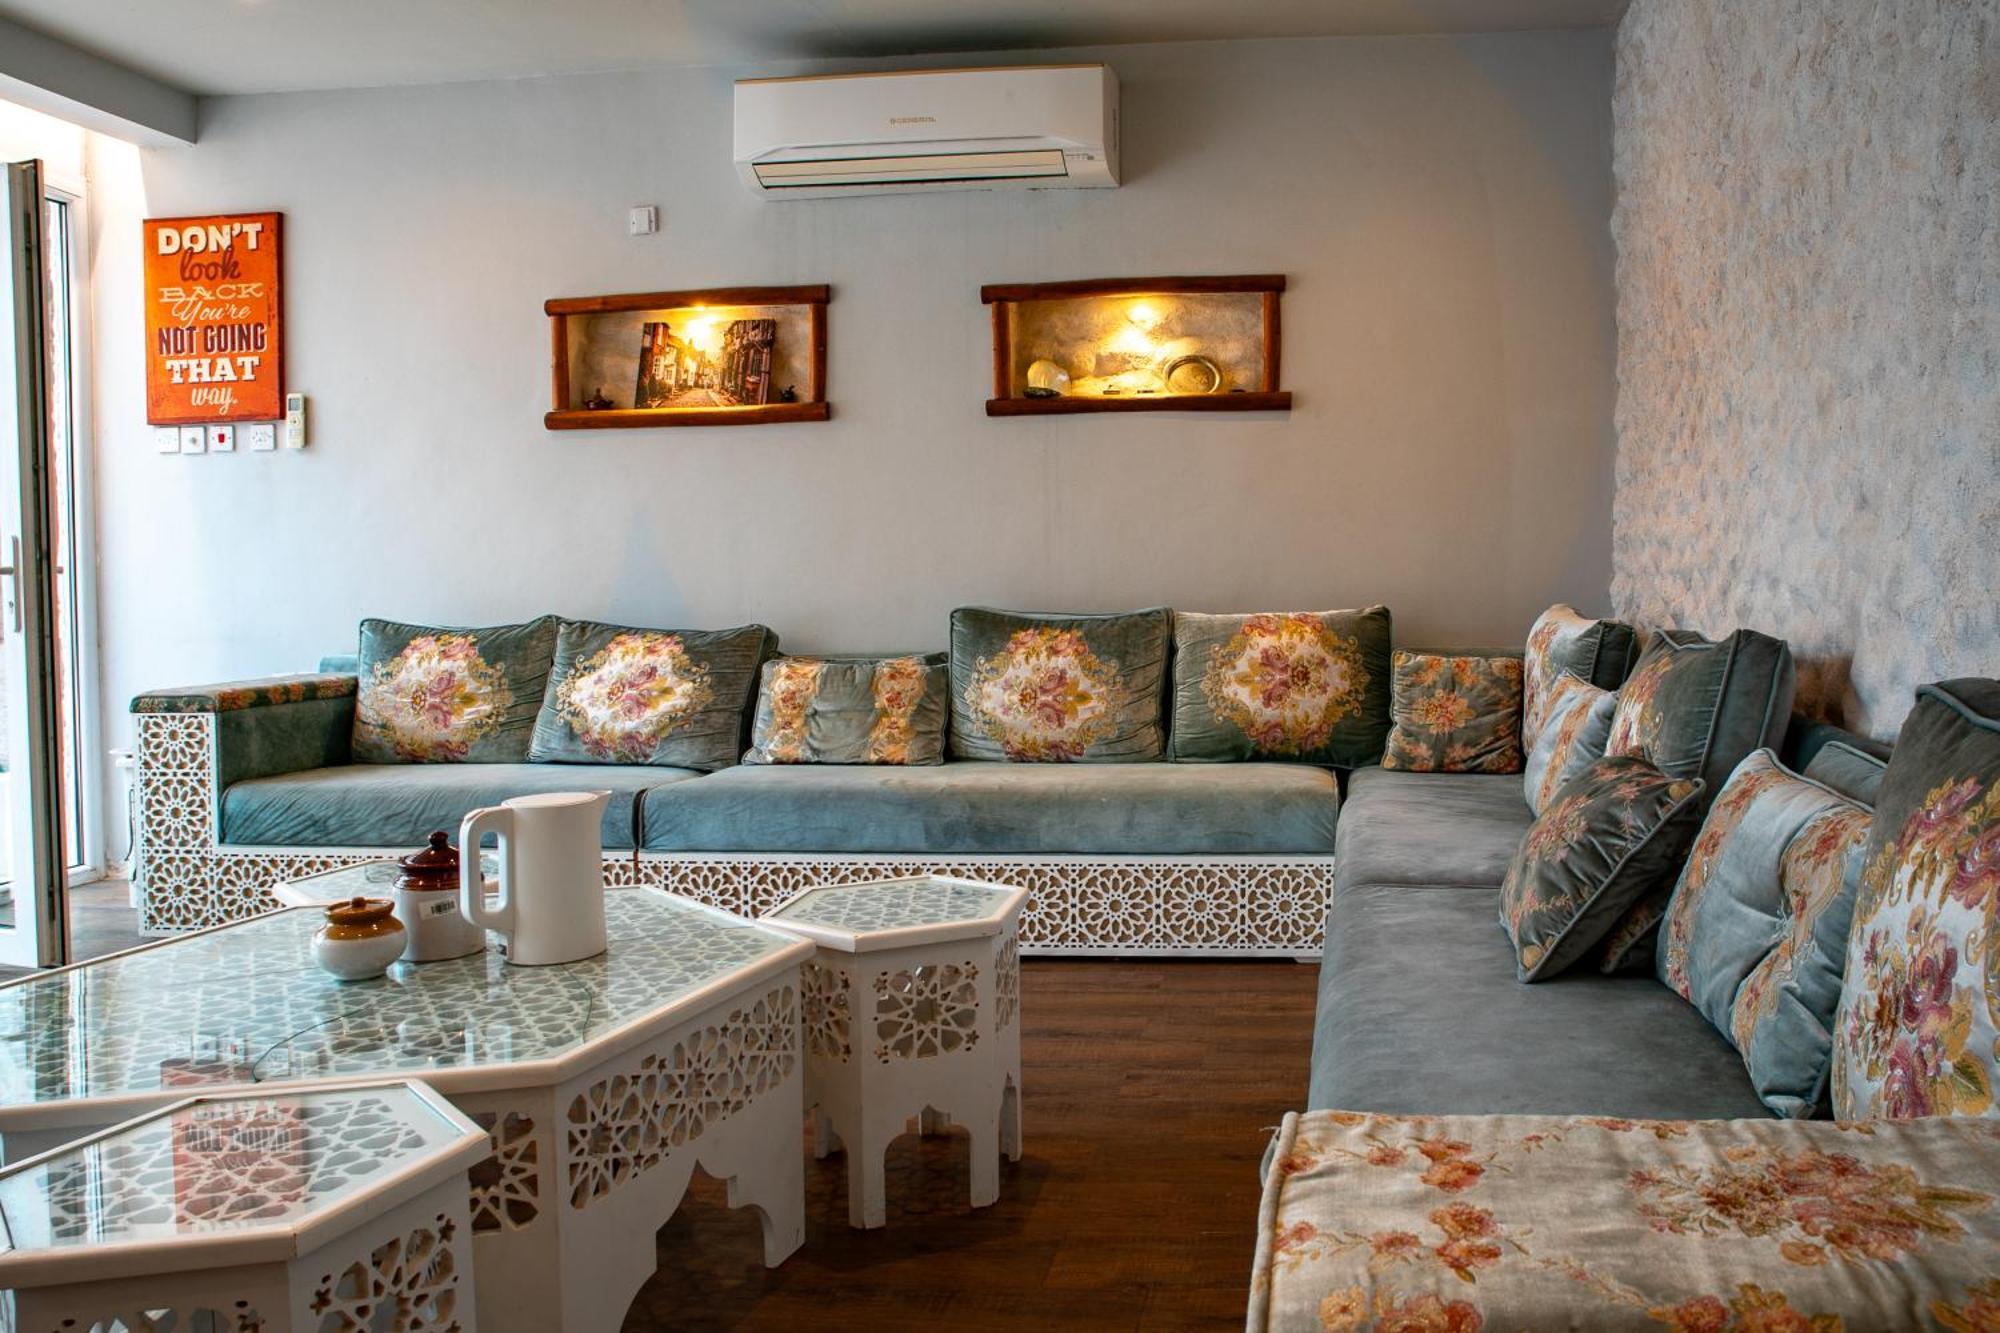 Elegant Garden Stay With 2 Living Areas, 2 Bedrooms, 1 Full And 1 Half Bath For 6 Guests Umm Al Amad Ngoại thất bức ảnh